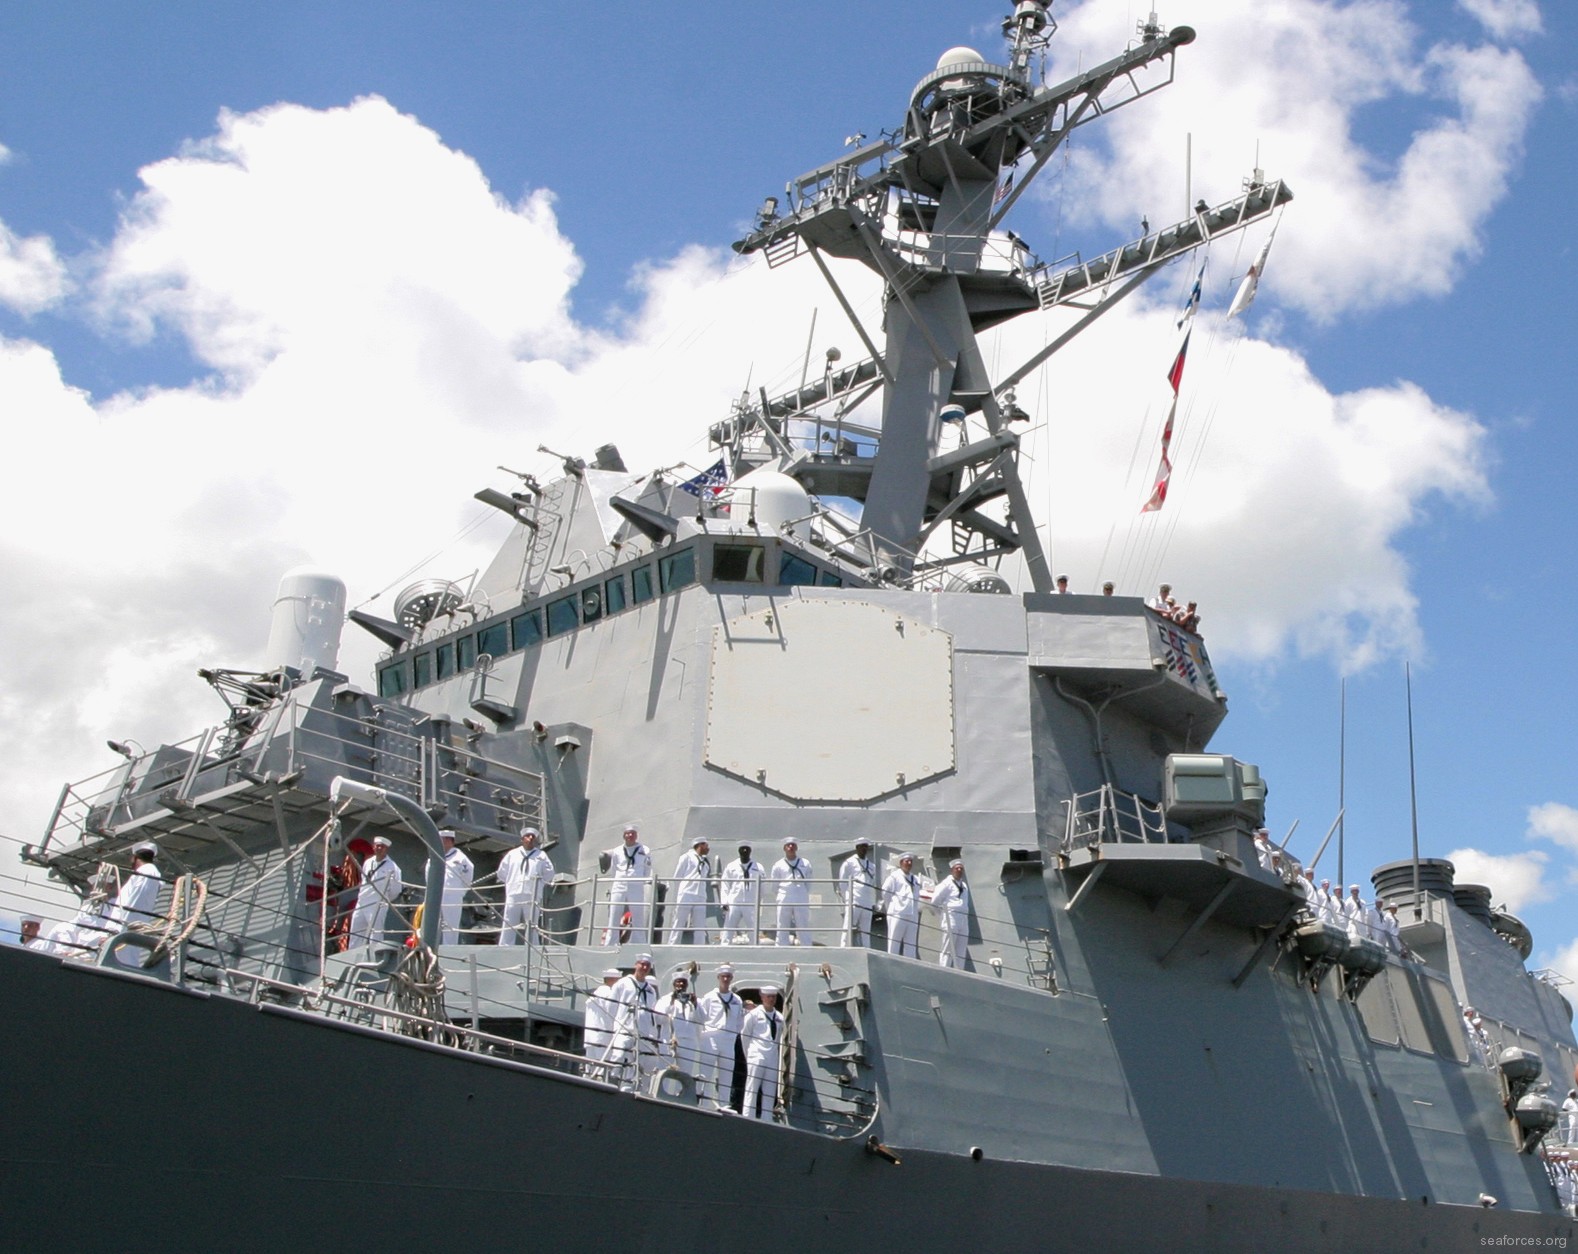 ddg-59 uss russell guided missile destroyer us navy 44 an/spy-1d radar